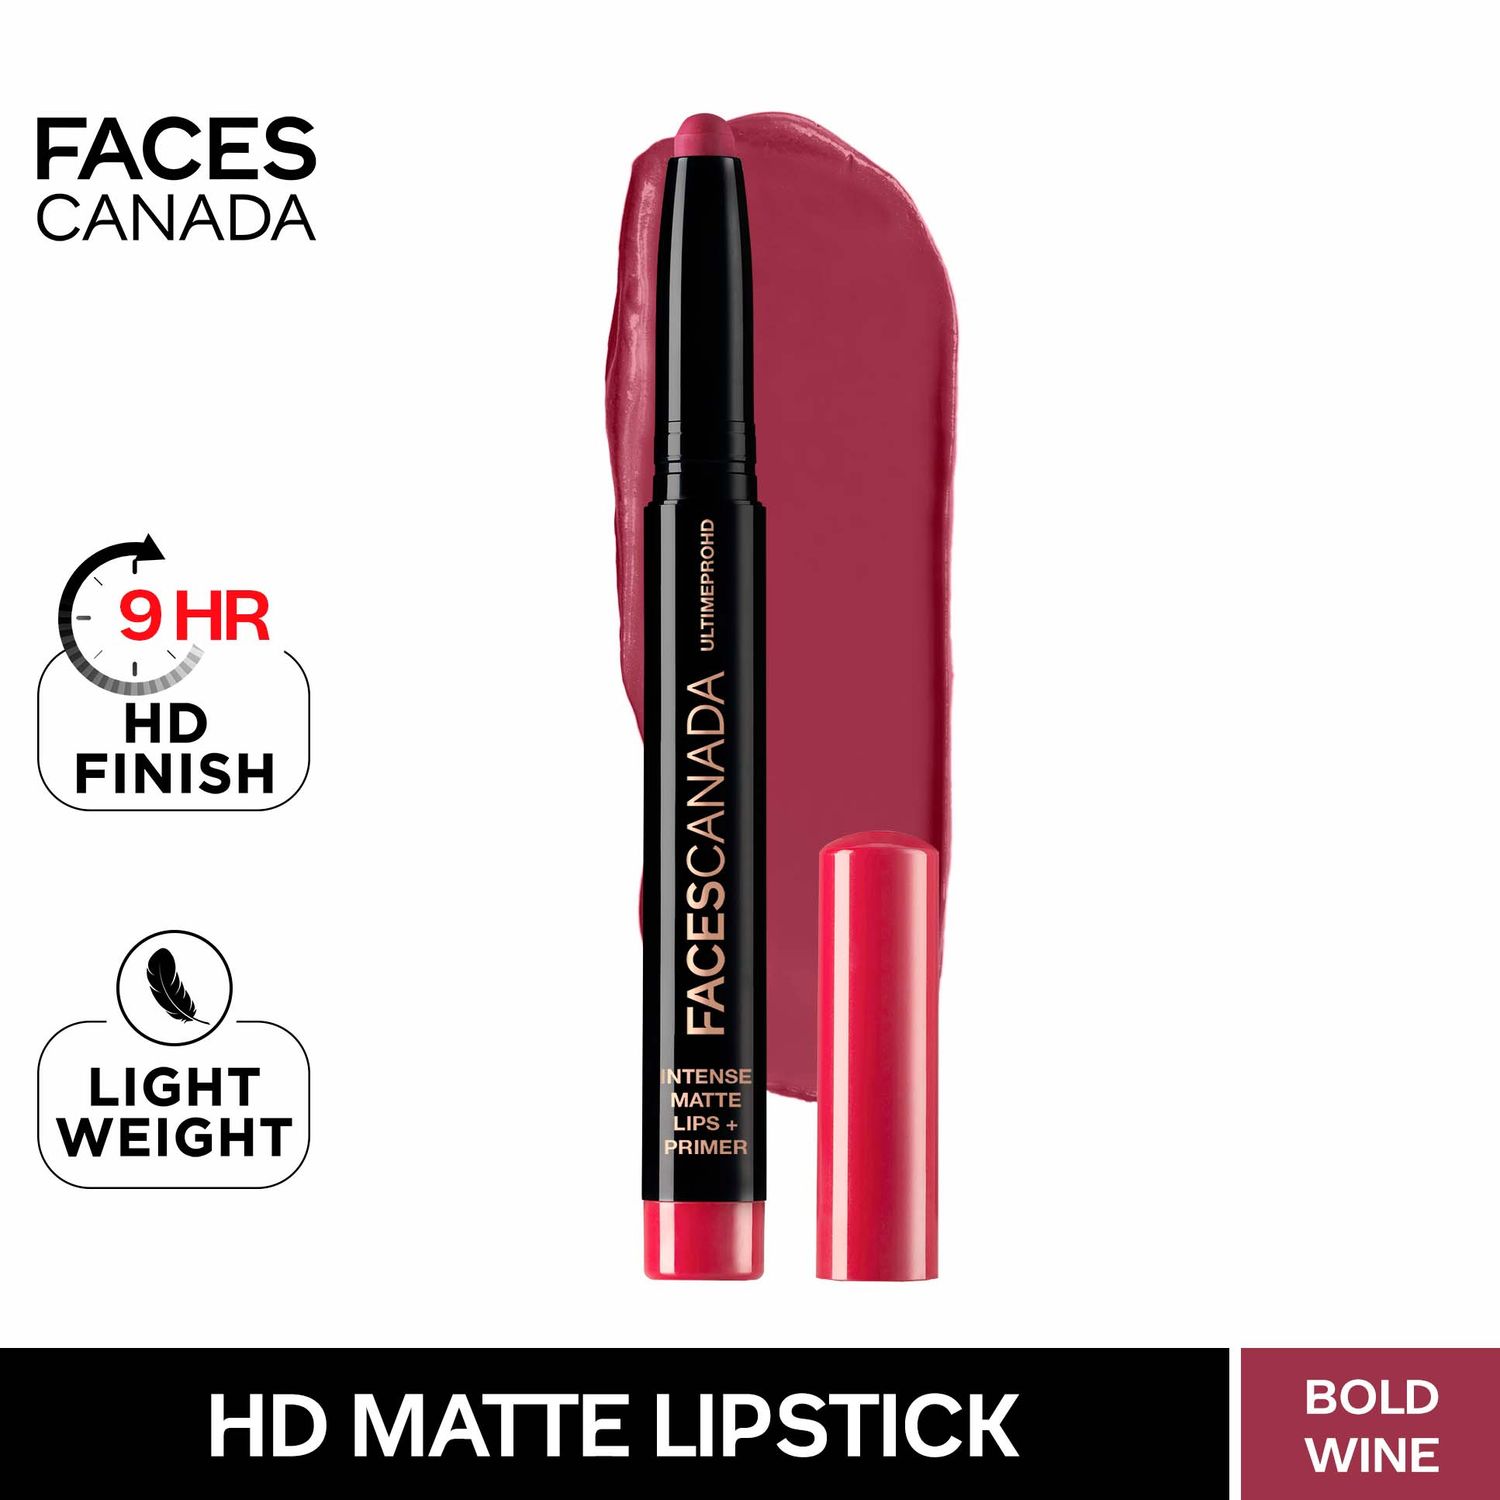 Faces Canada HD Intense Matte Lipstick | Feather light comfort | 10 hrs stay| Primer infused | Flawless HD finish | Made in Germany | Bold Wine 1.4g